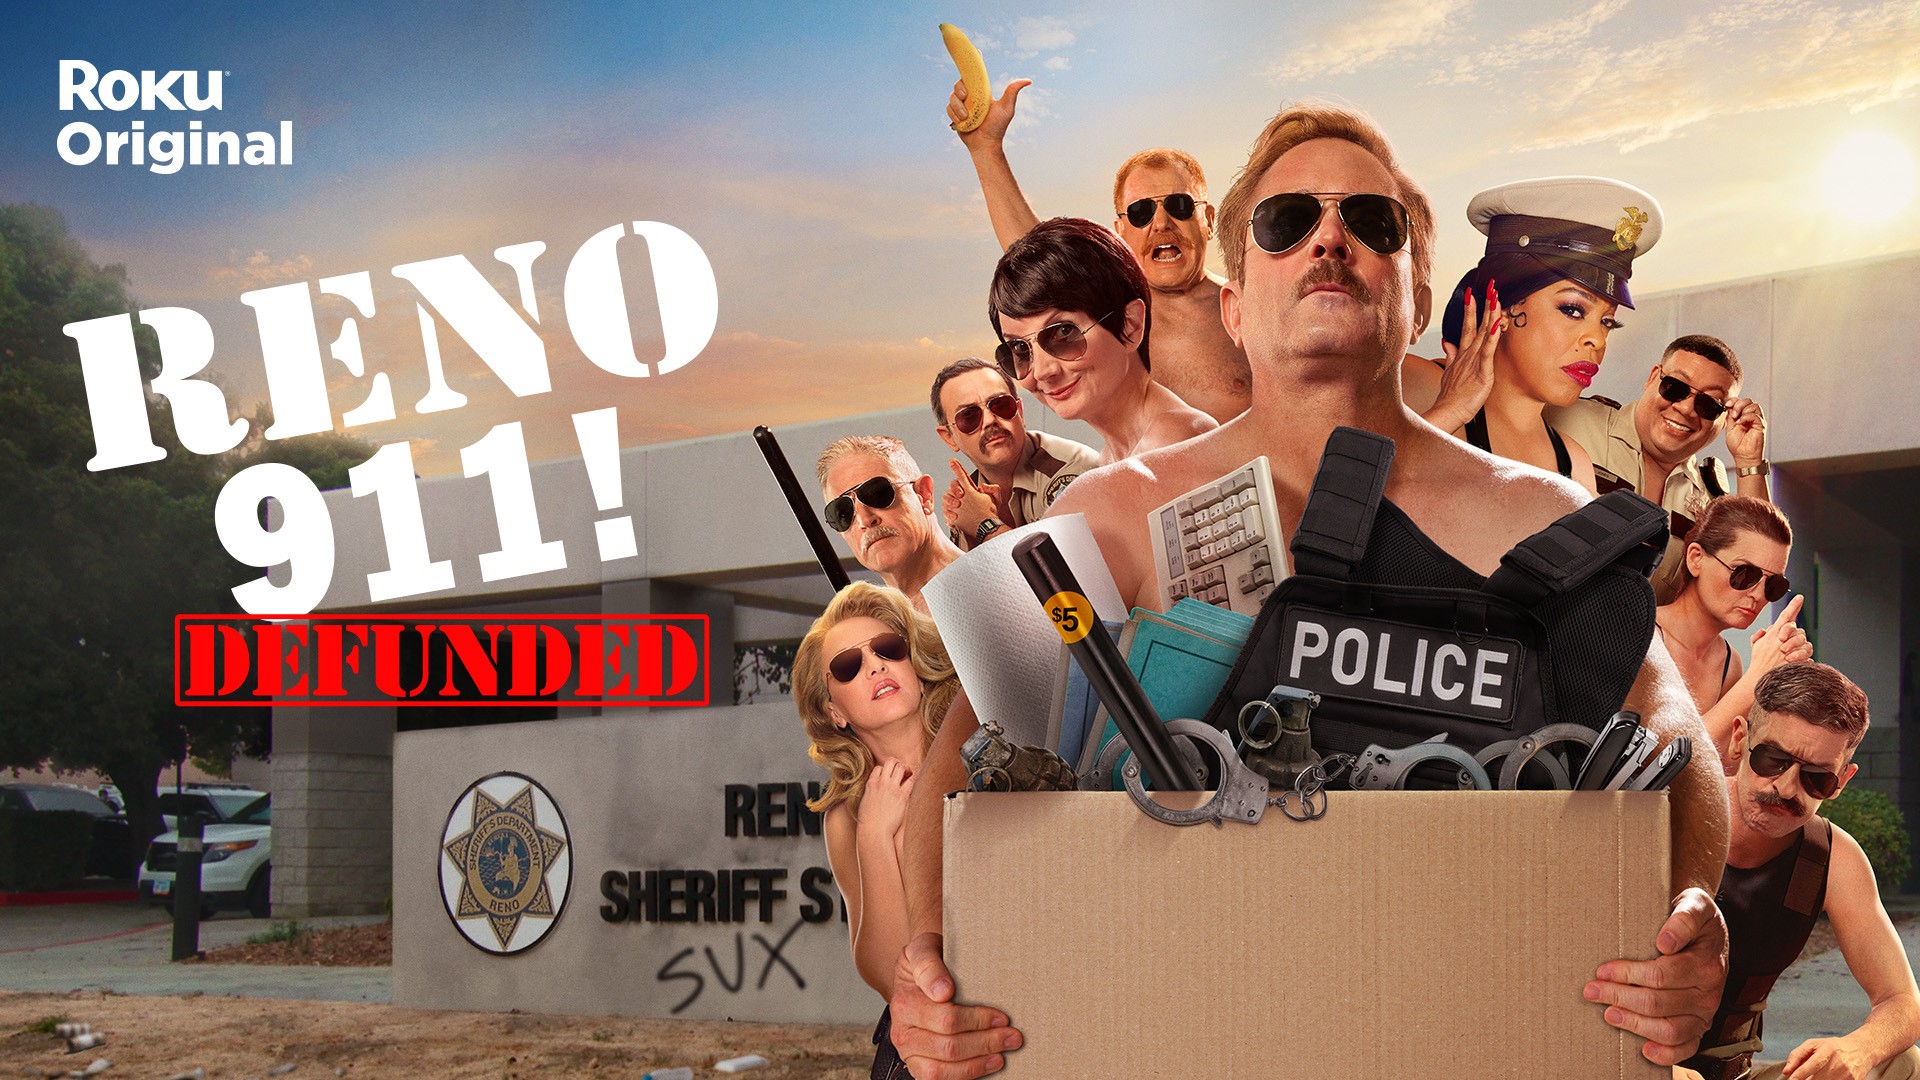 New ‘Reno 911!’ Series to Debut on The Roku Channel as an Original